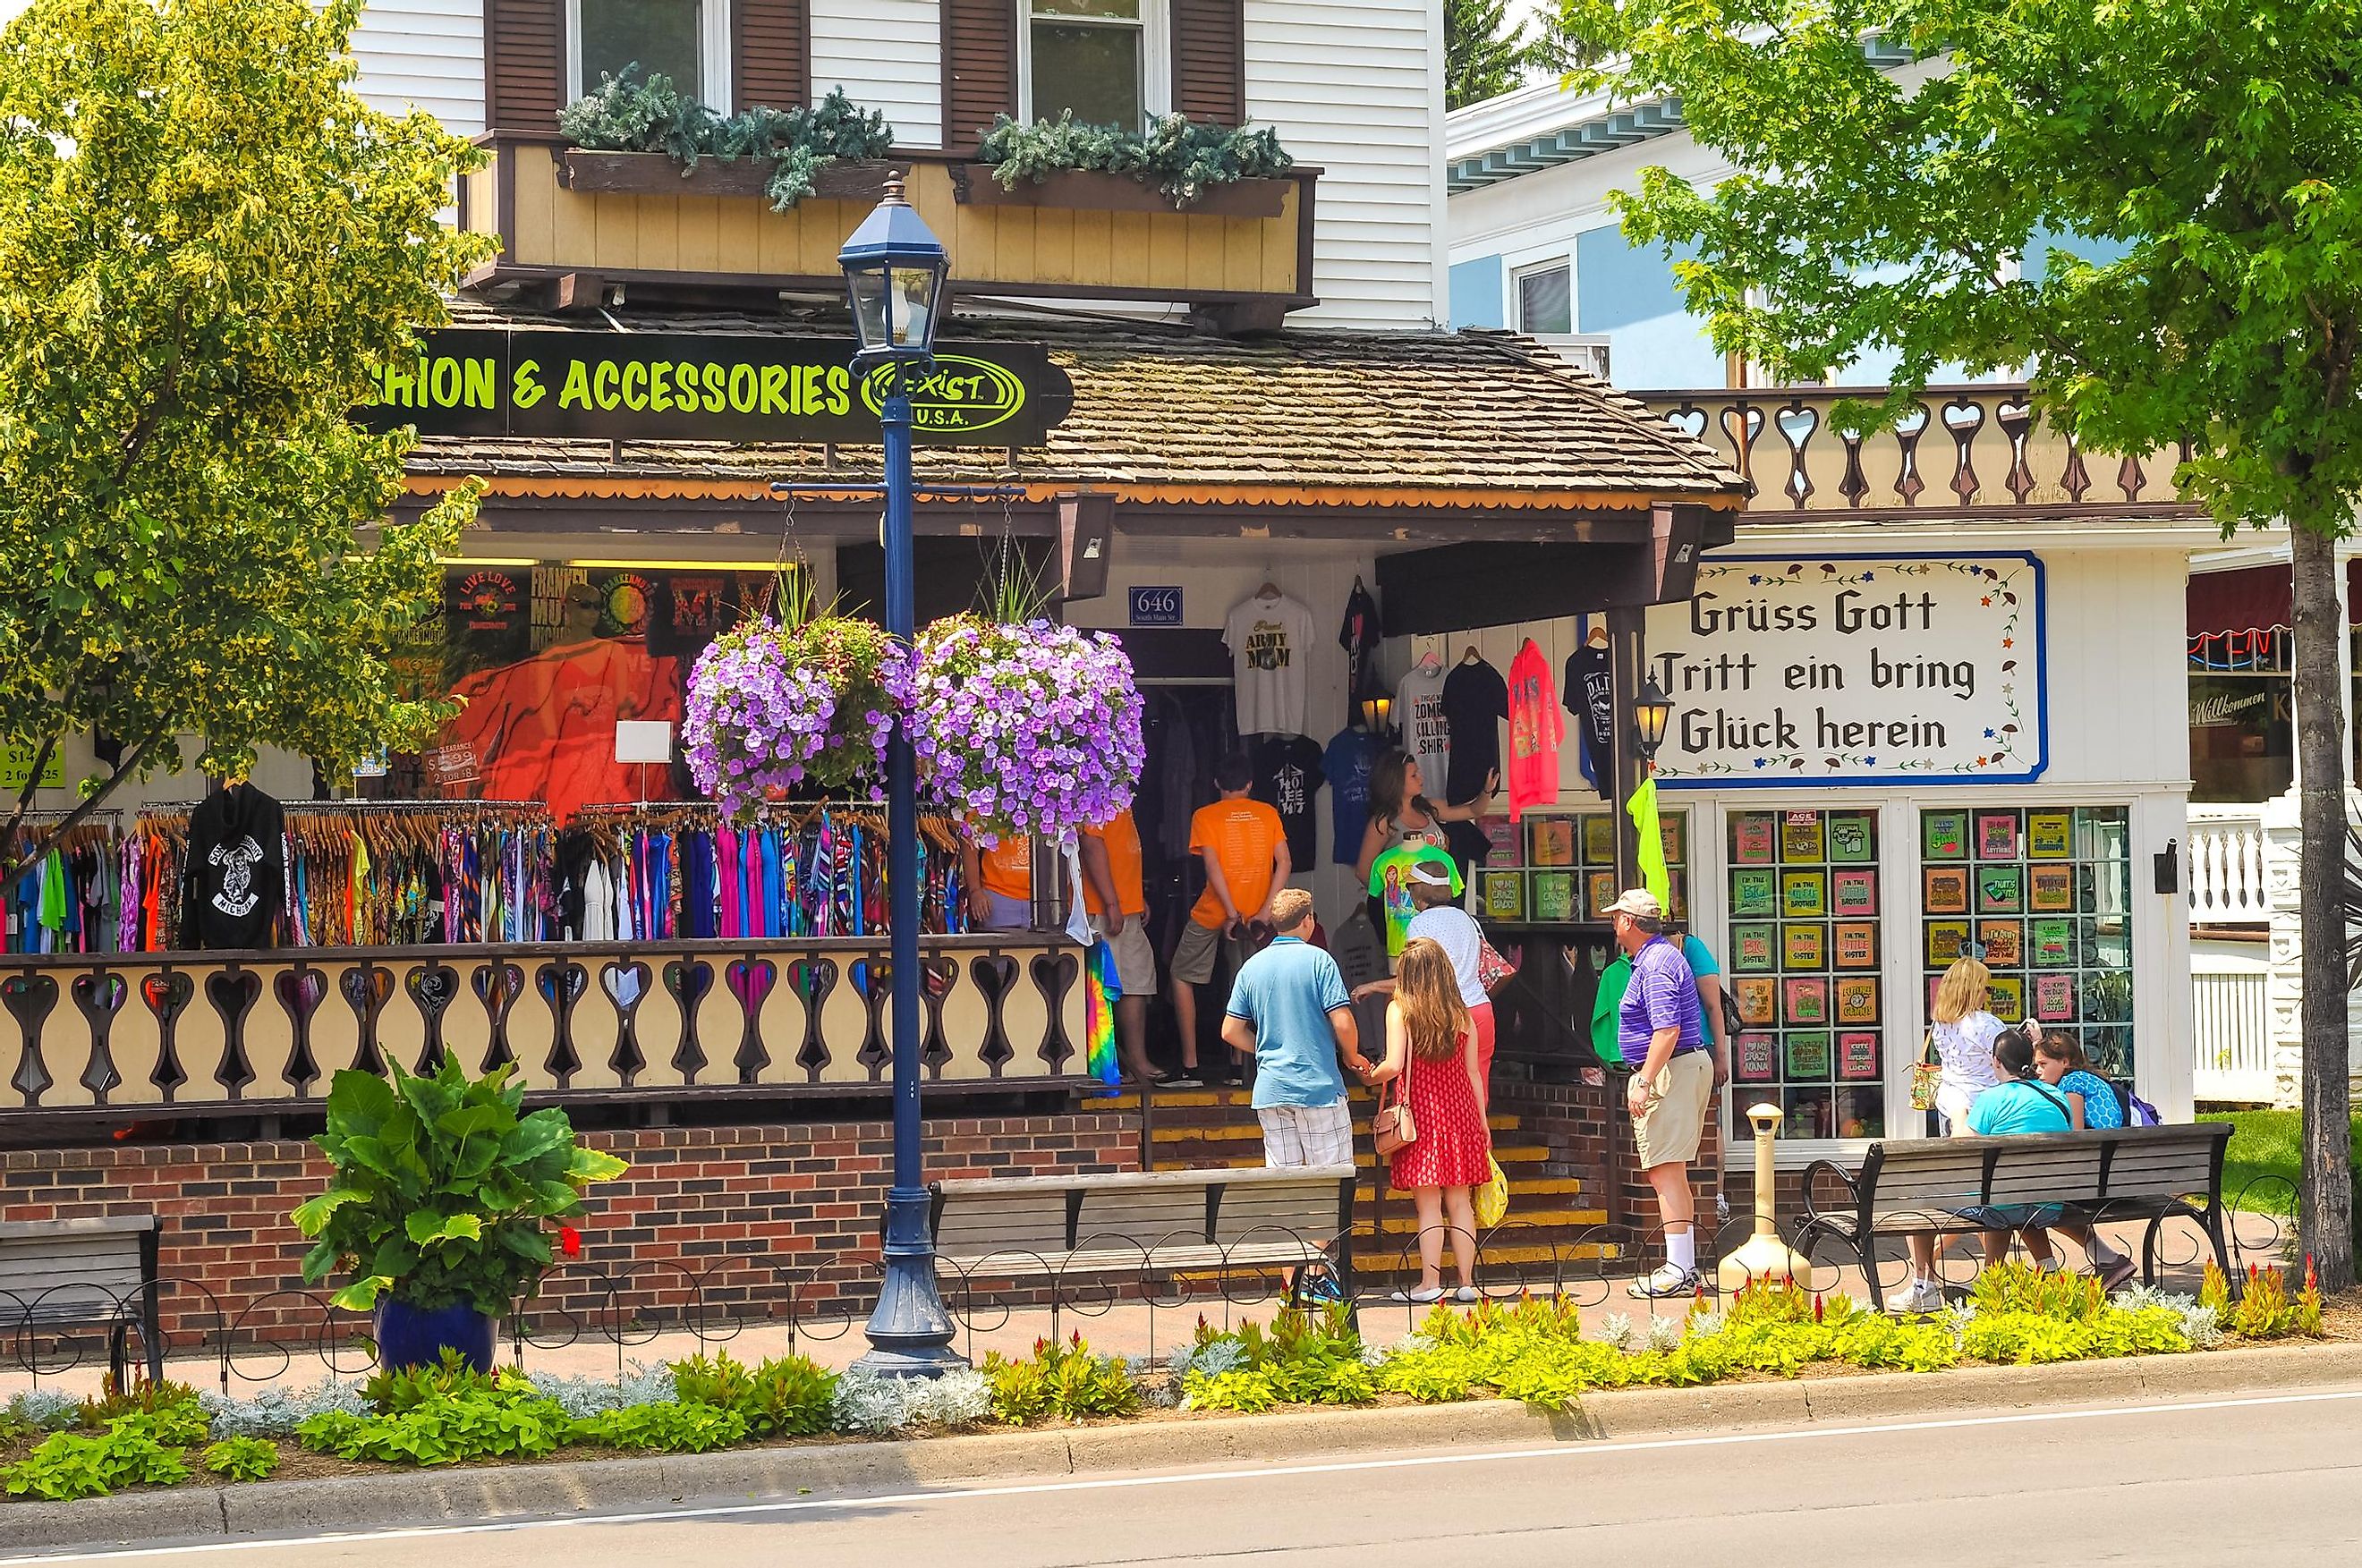  German-style architecture and culture along Main Street in Frankenmuth, Michigan